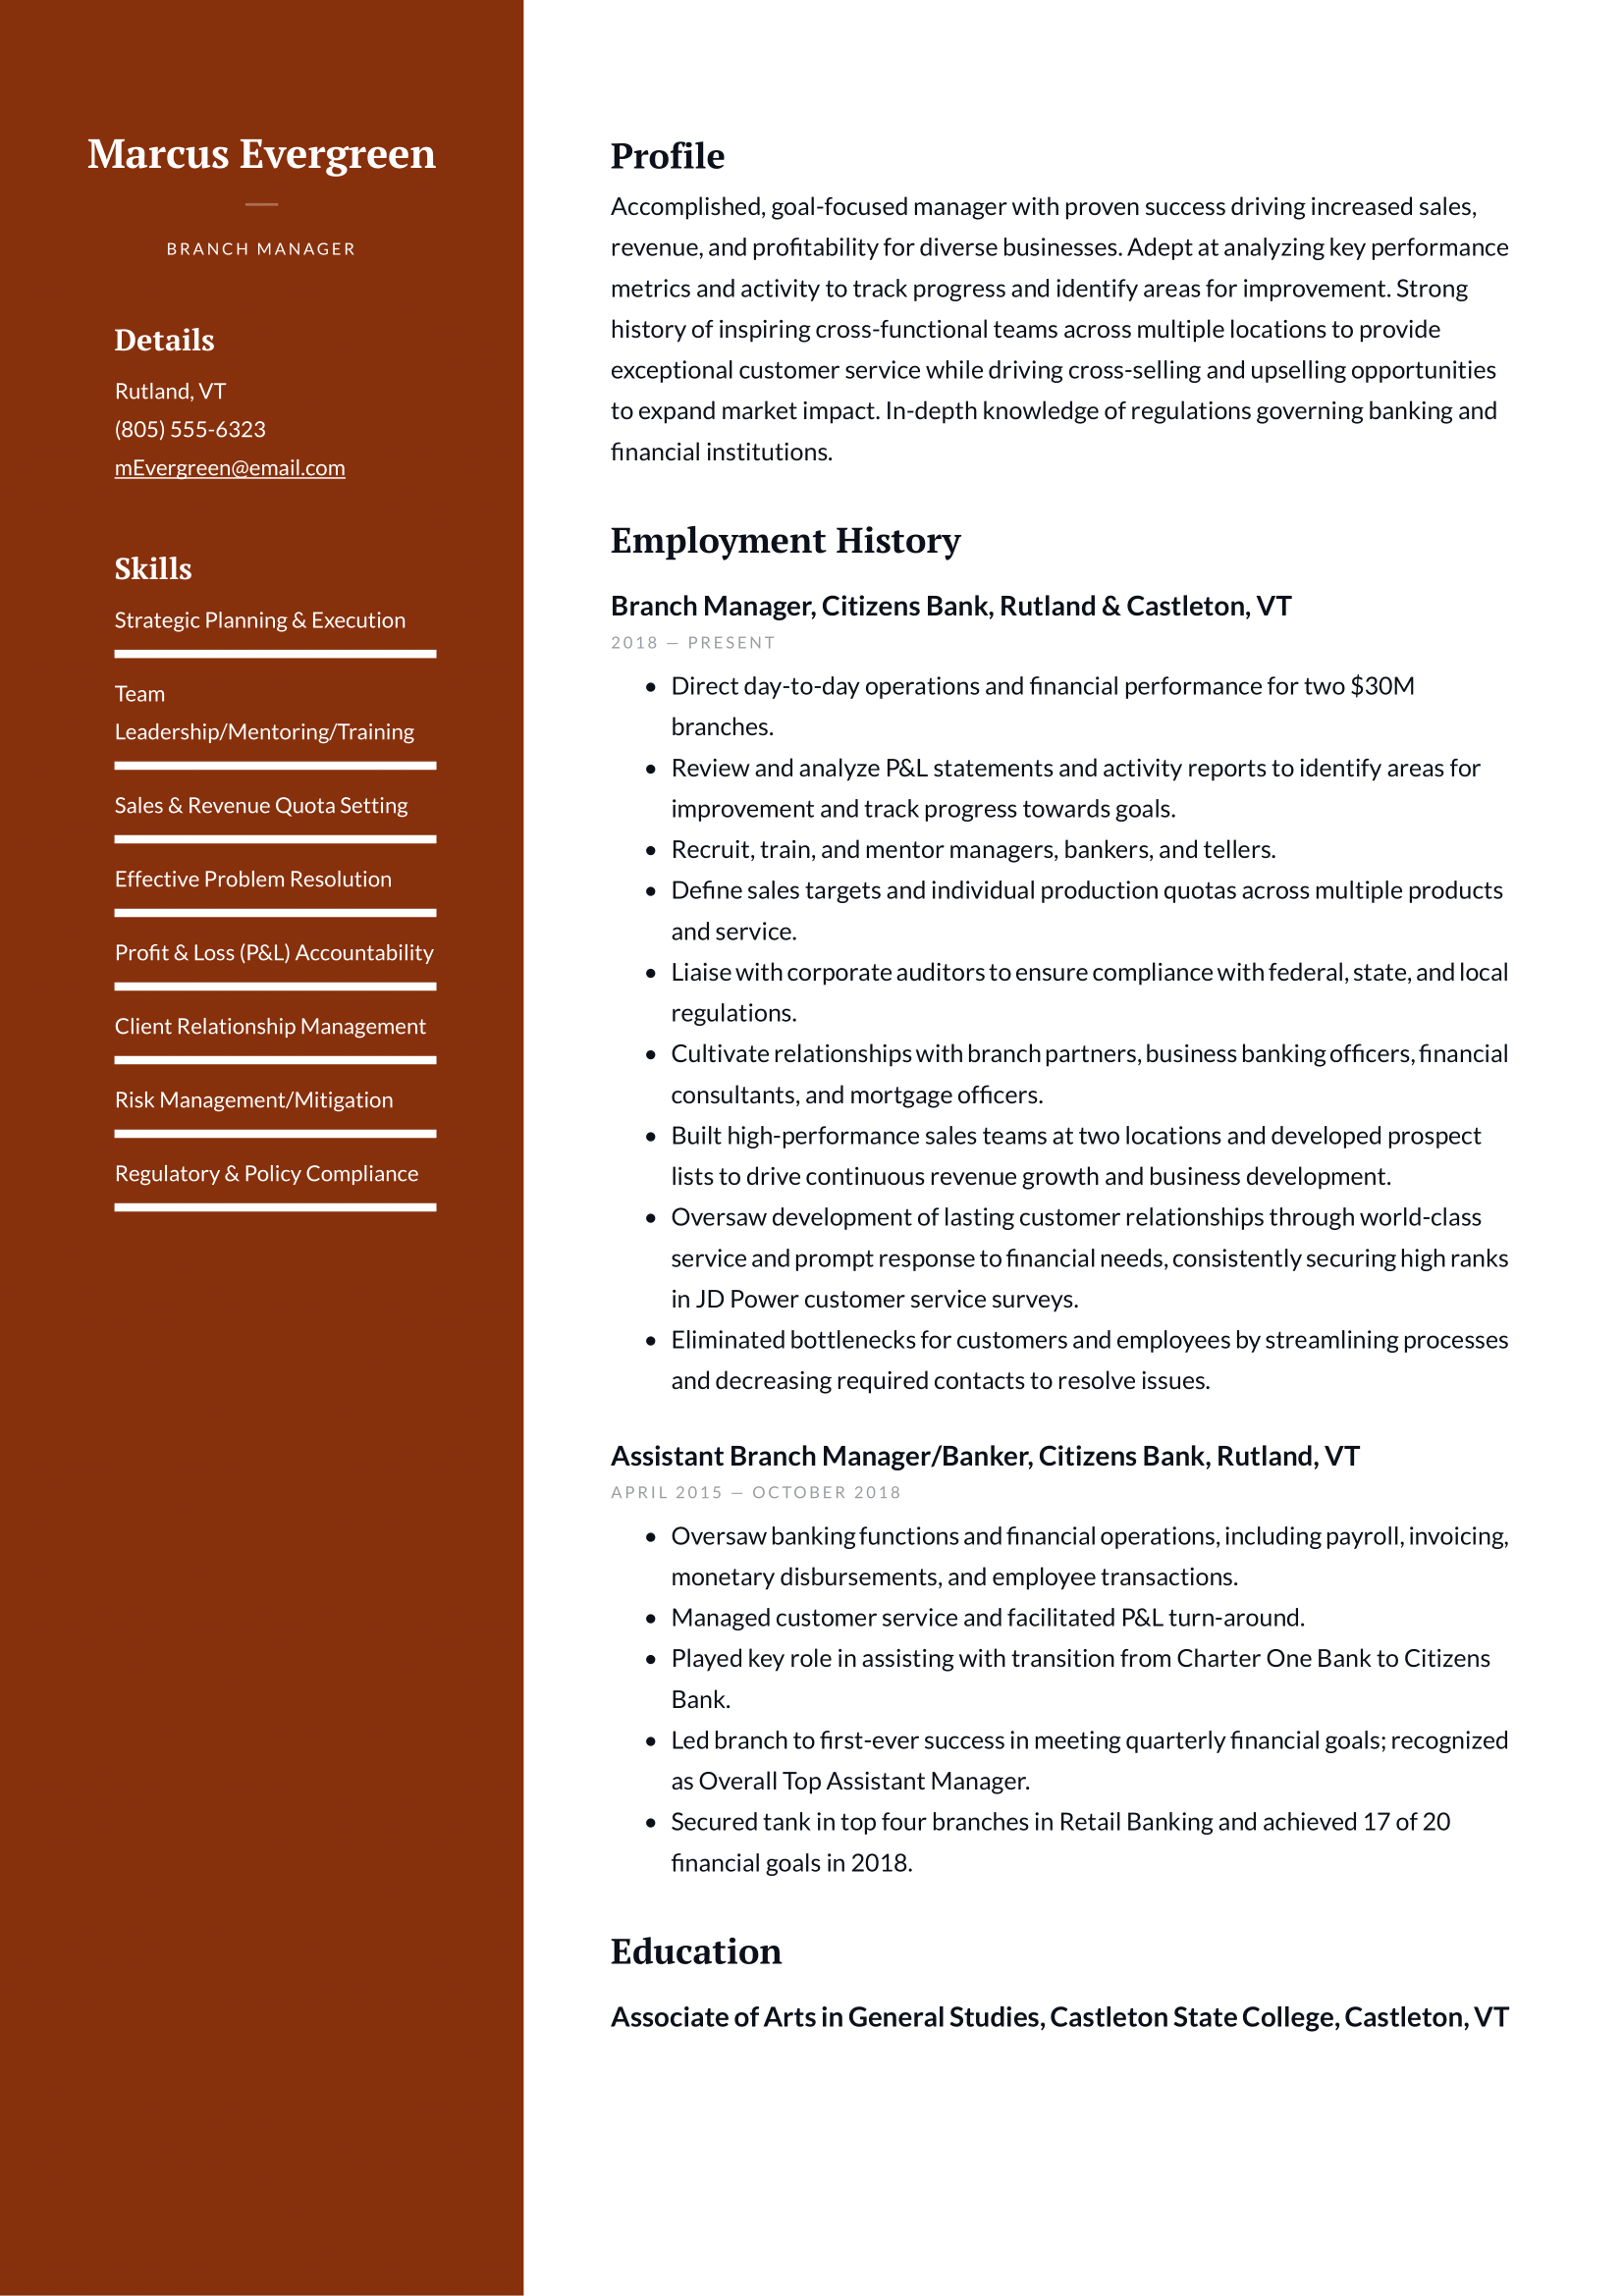 Branch Manager (Bank) Resume Example & Writing Guide